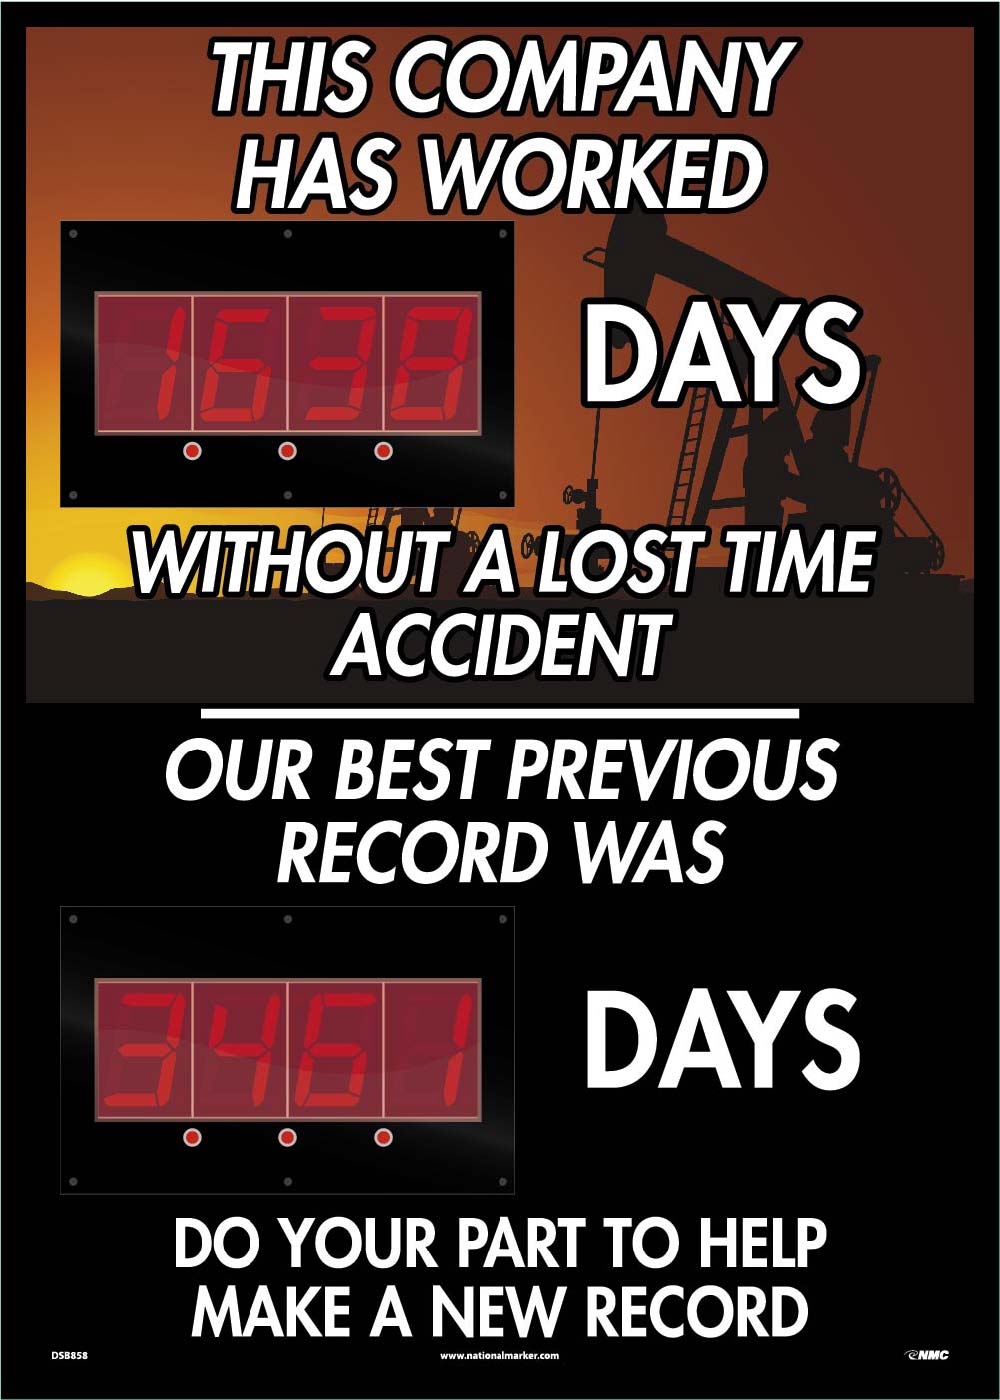 This Company Has Worked Days Without A Lost Time Accident 2 Led Digital Scoreboard-eSafety Supplies, Inc